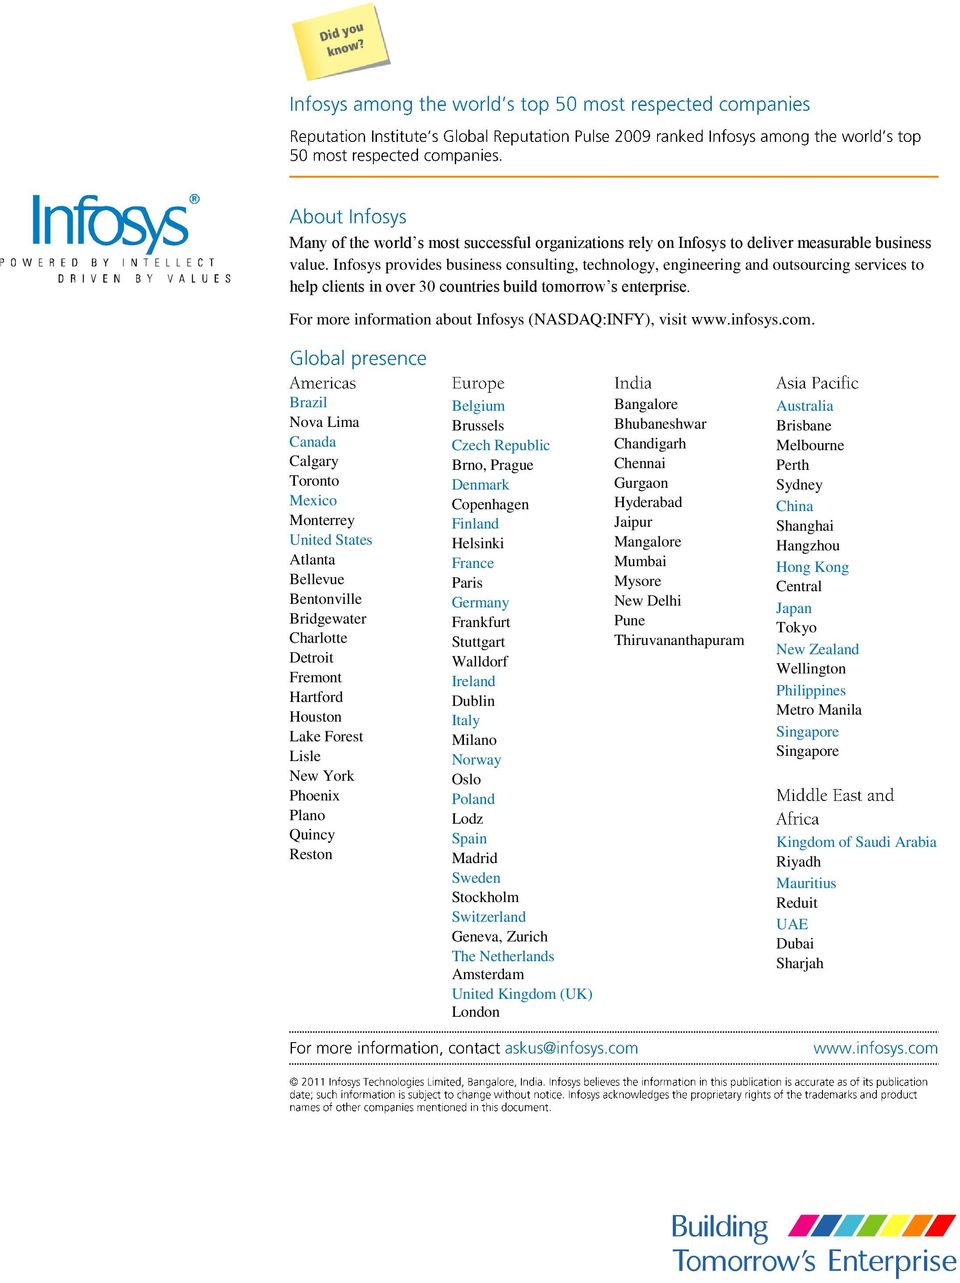 For more information about Infosys (NASDAQ:INFY), visit www.infosys.com.